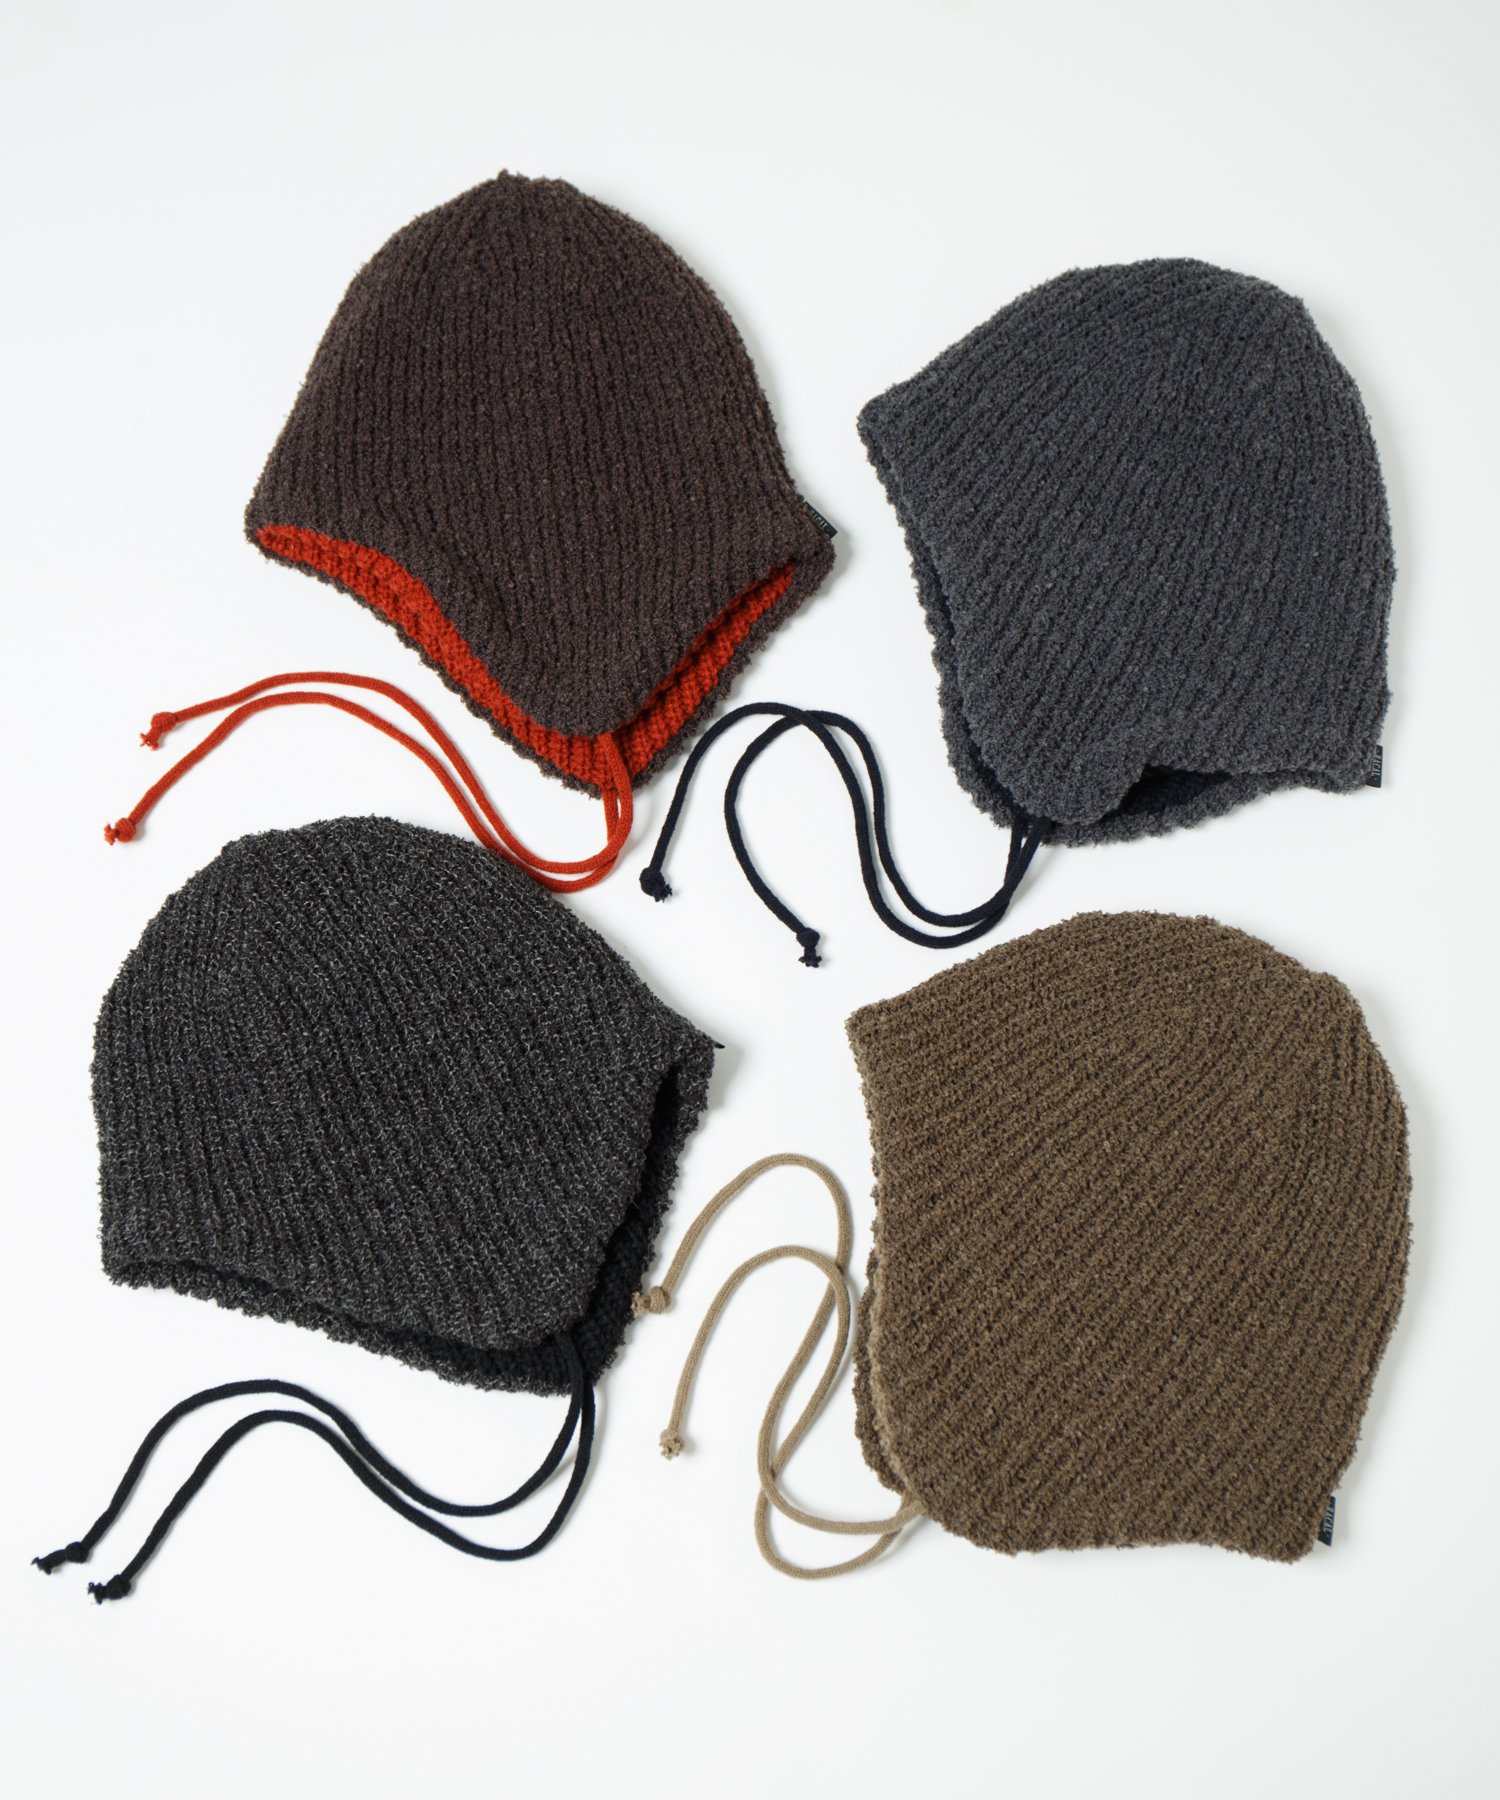 RACAL Reversible Ear Knit Cap 1318 リバーシブル耳当て付きニットキャップ